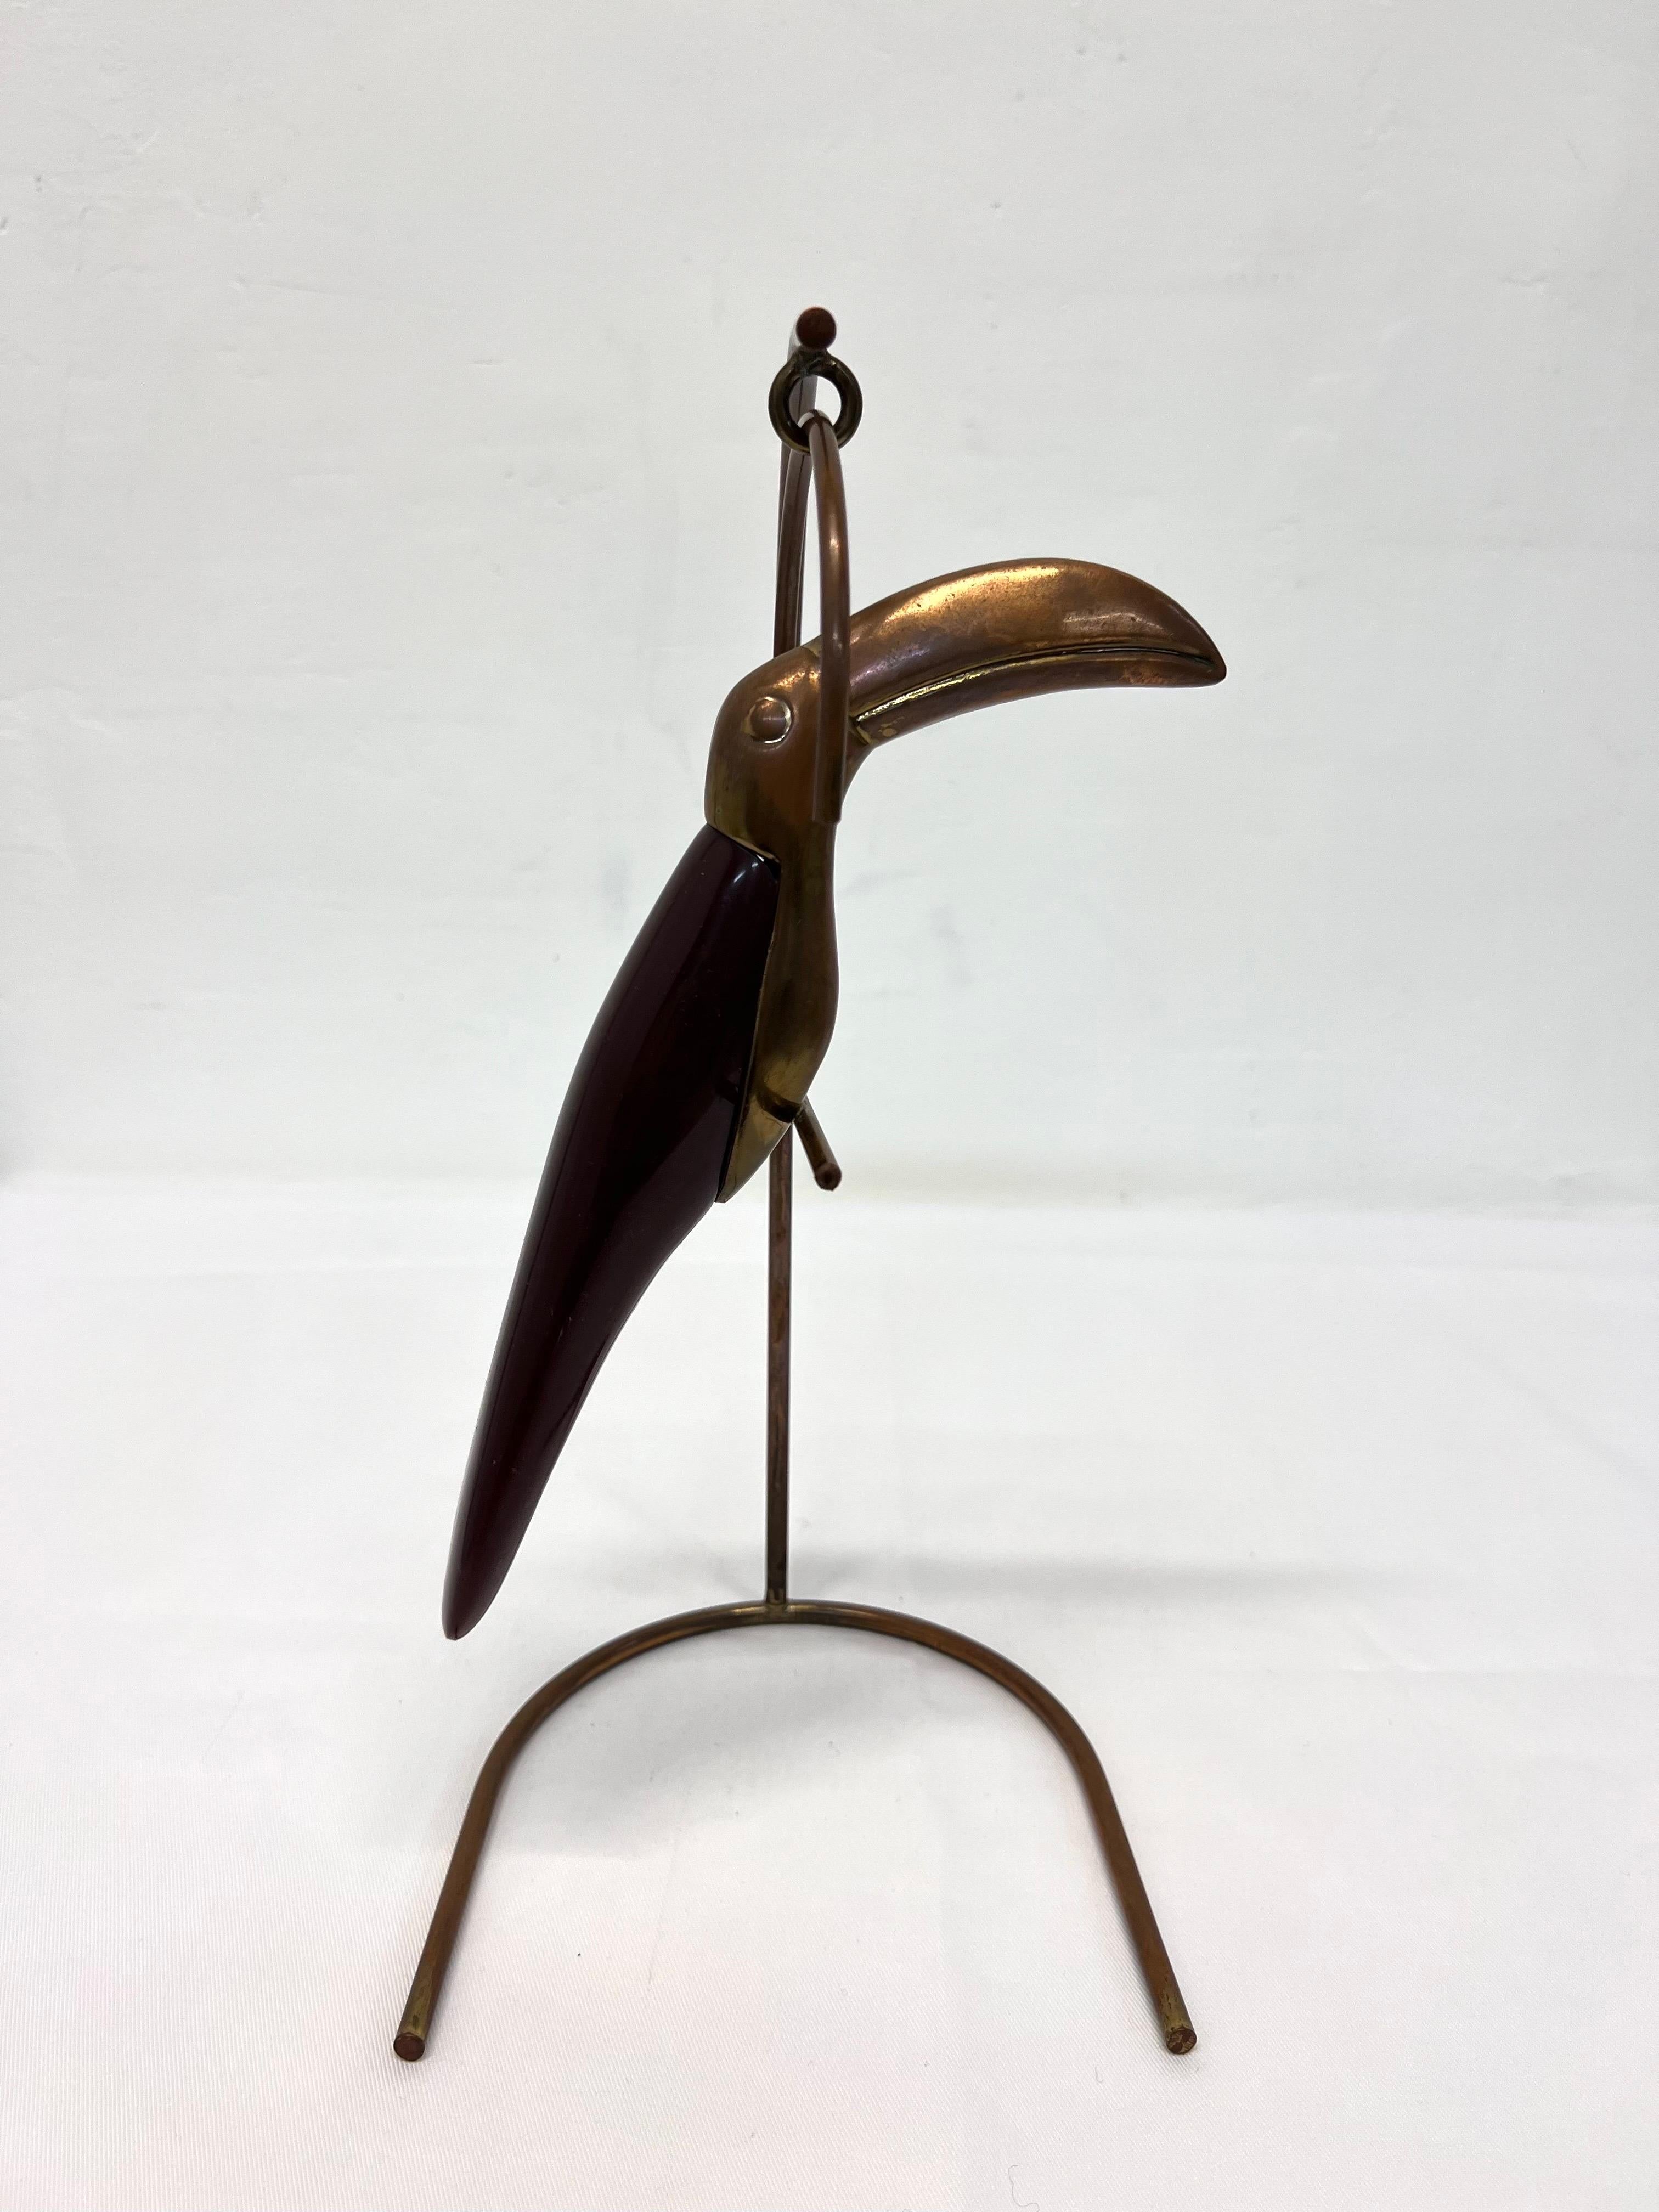 Brazilian Mid-Century Modern Brass and Resin Toucan on Stand, 1960s For Sale 4